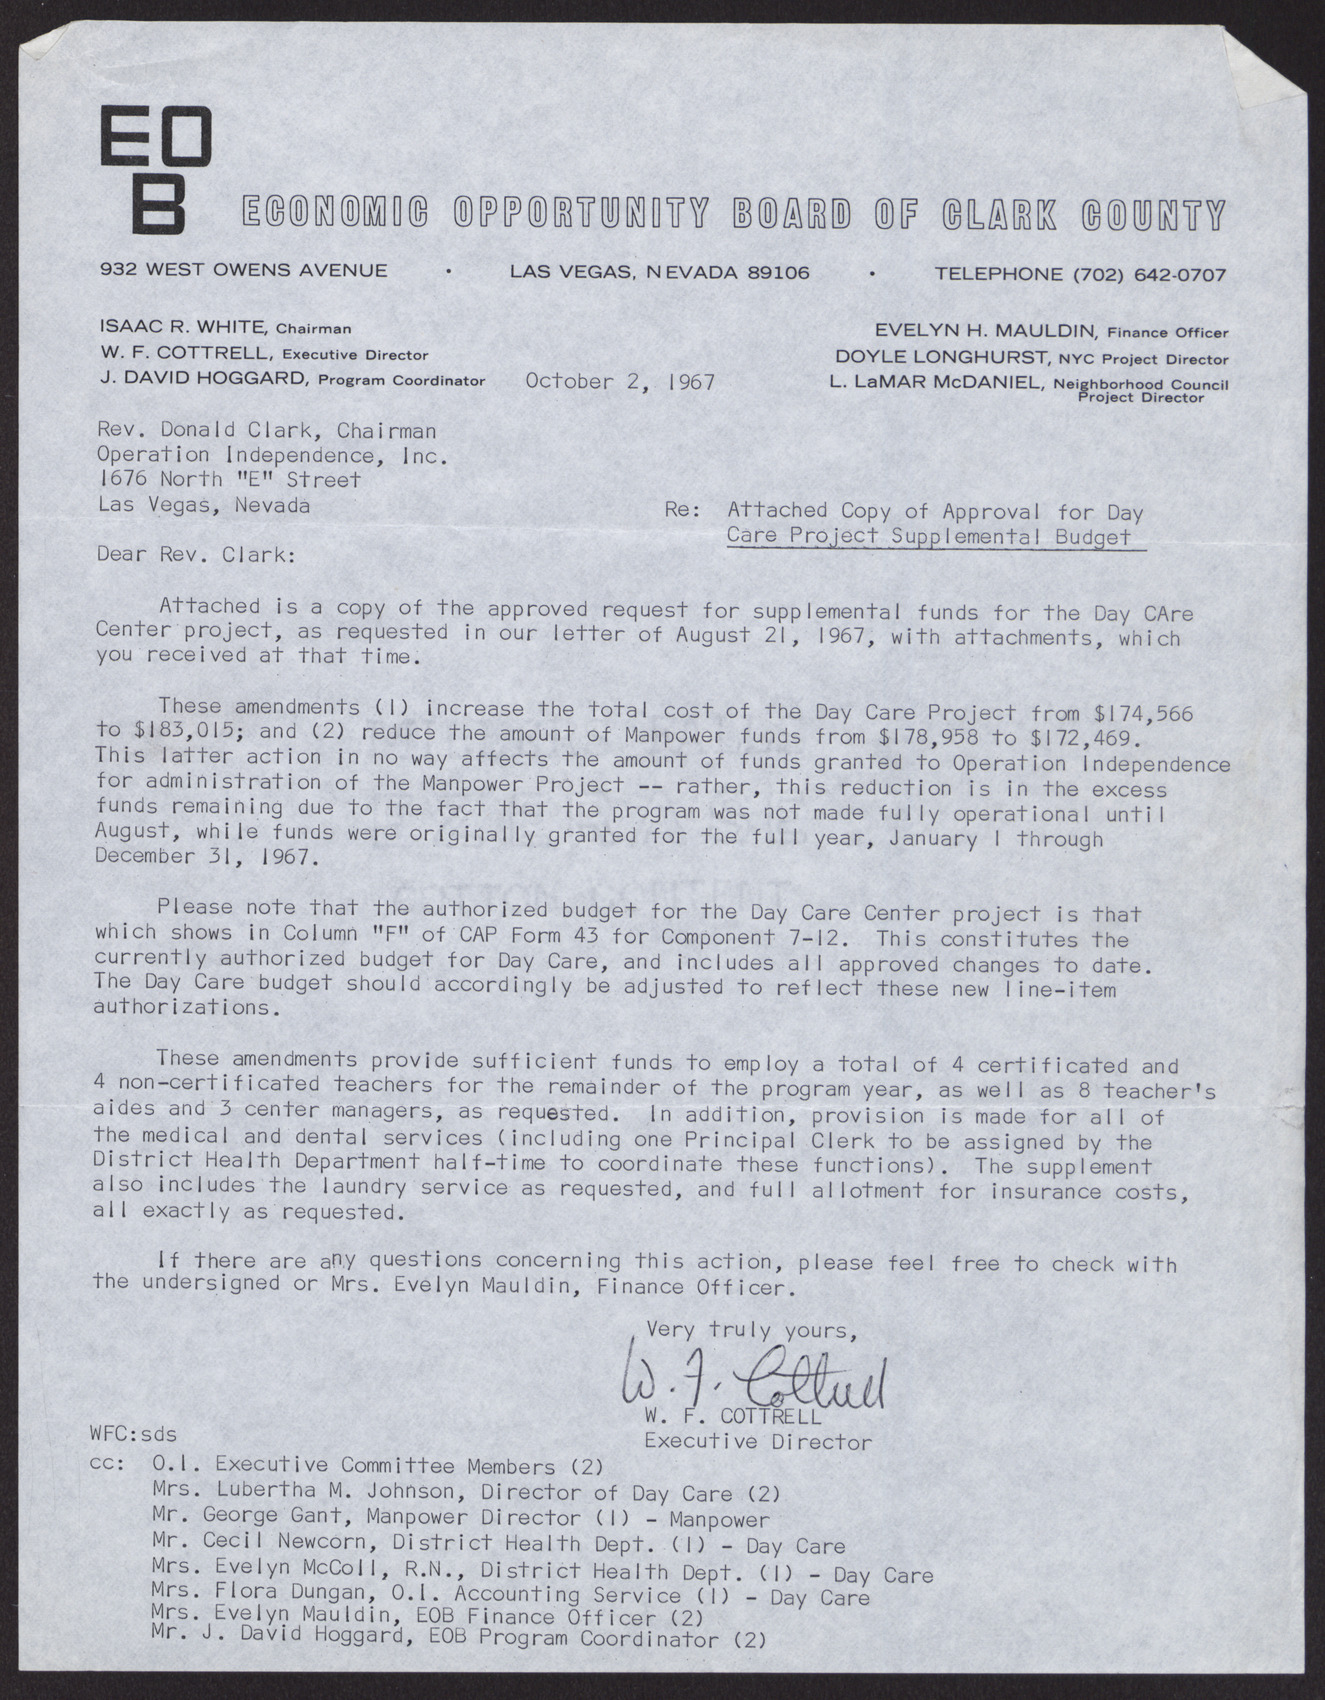 Letter to Rev. Donald Clark from W. F. Cottrell, October 2, 1967